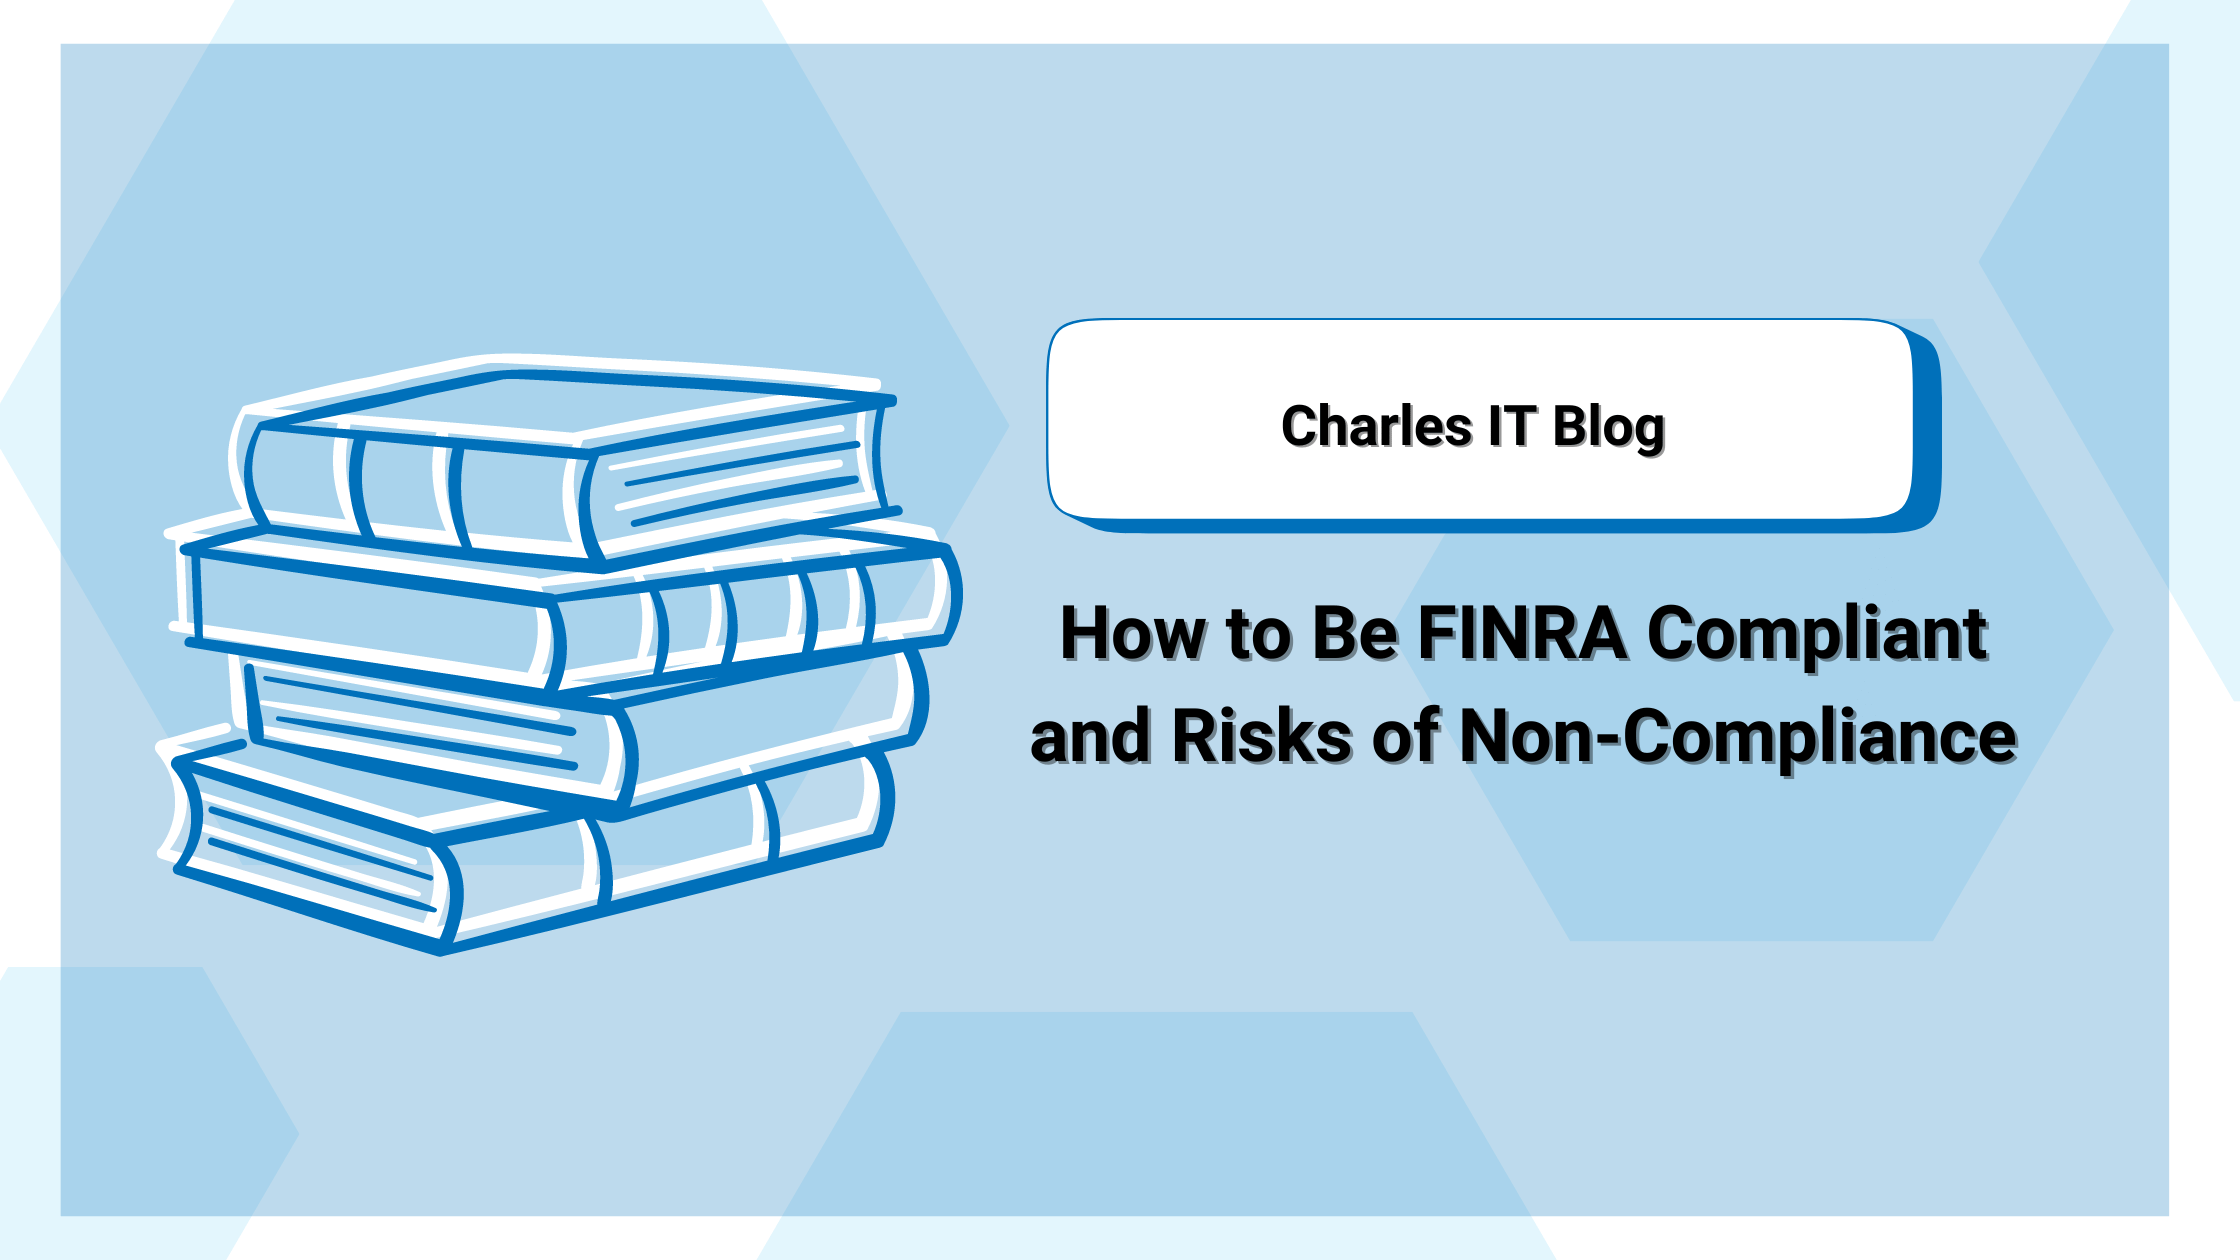 How to Be FINRA Compliant and Risks of Non-Compliance